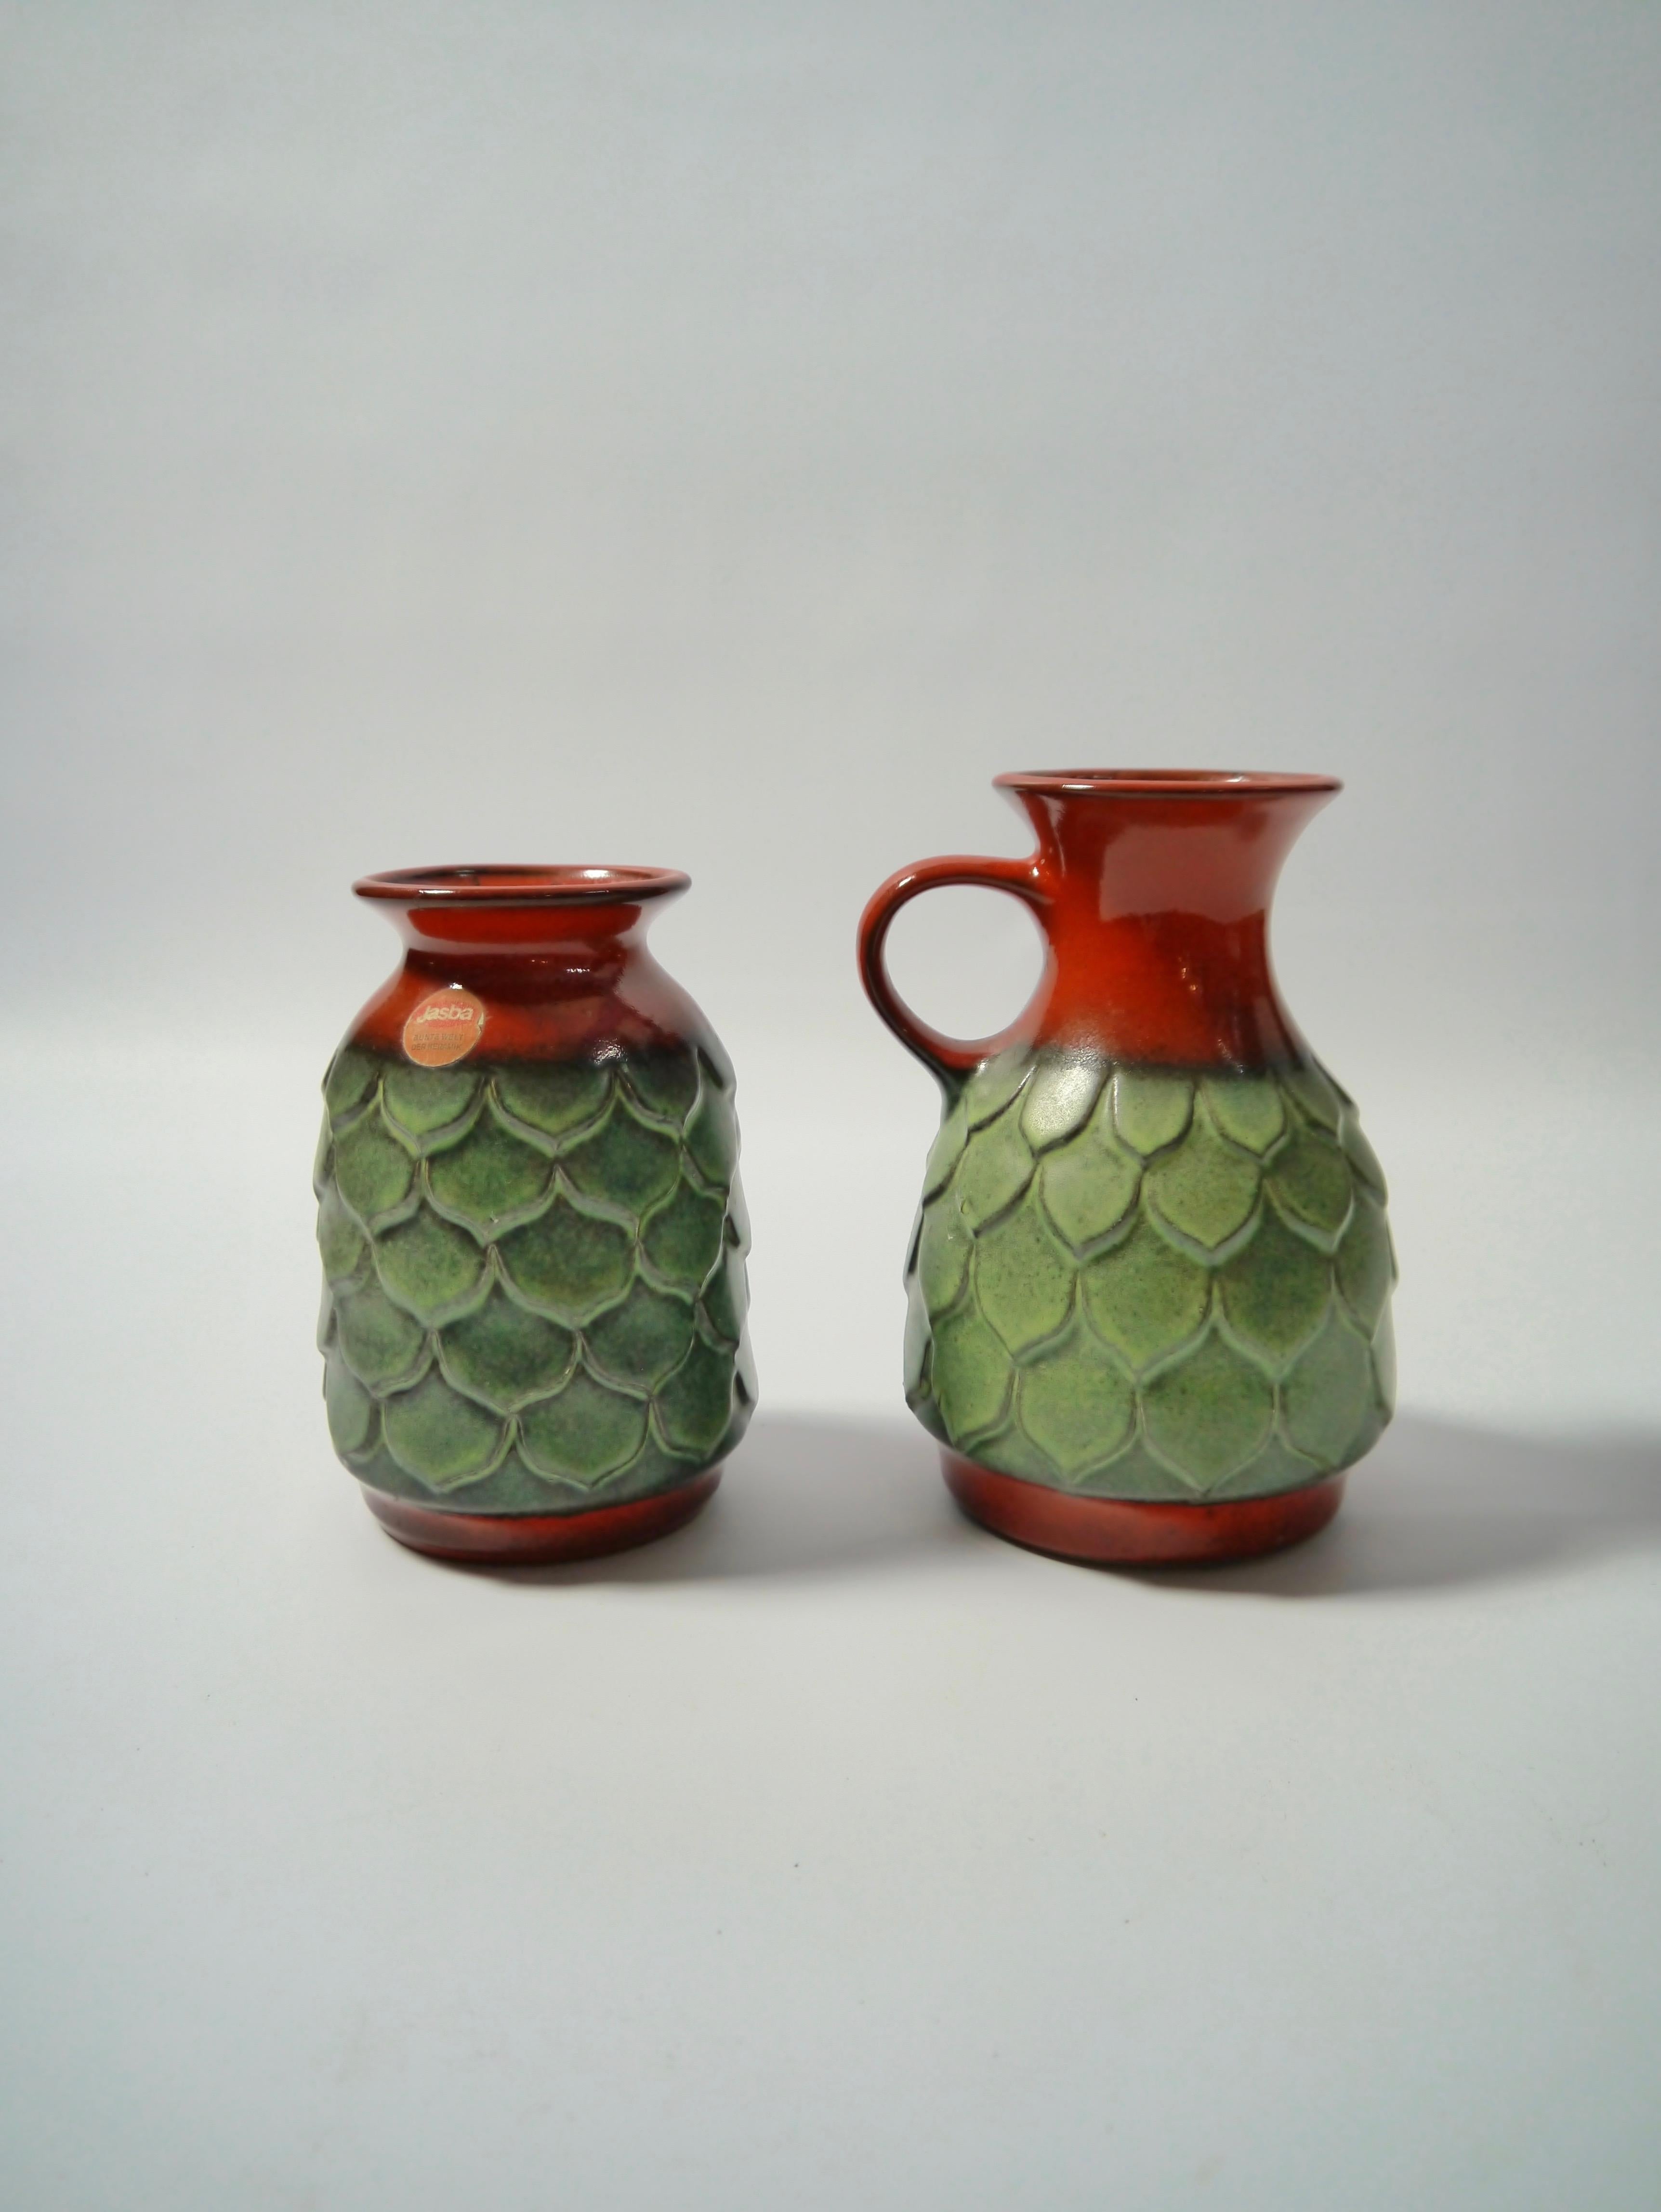 A pair of West German pottery vases fabricated by Jasba. Curios green fisch-scale pattern. One vase retains the original sticker, both marked at the bottom.